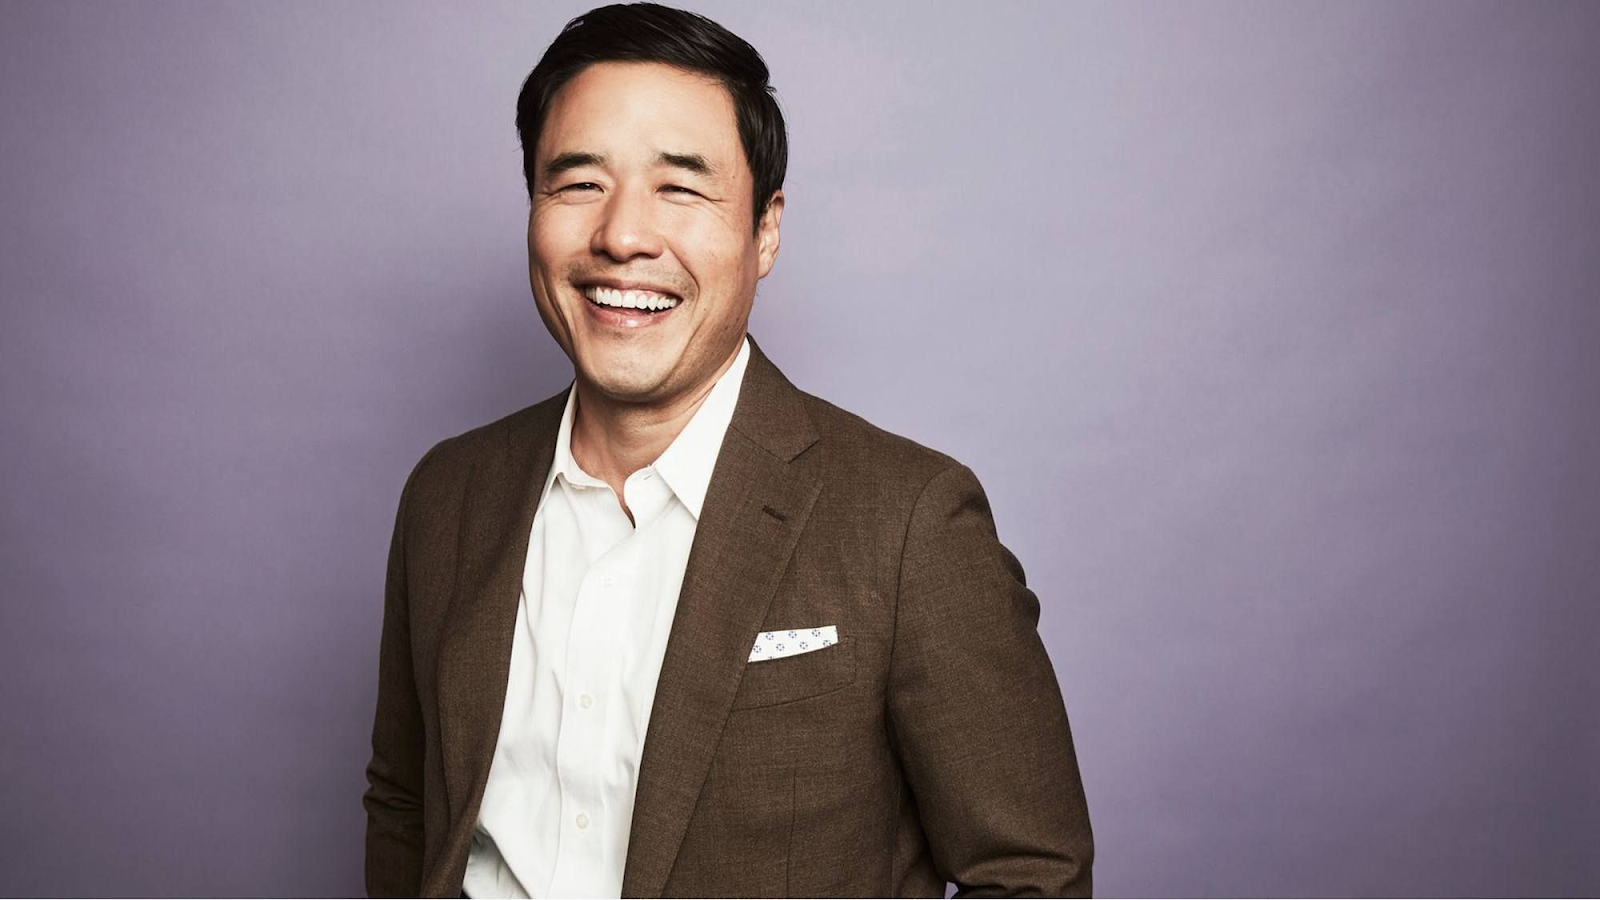 Randall Park is a famous Asian-American actor and comedian. - Conversations About HER